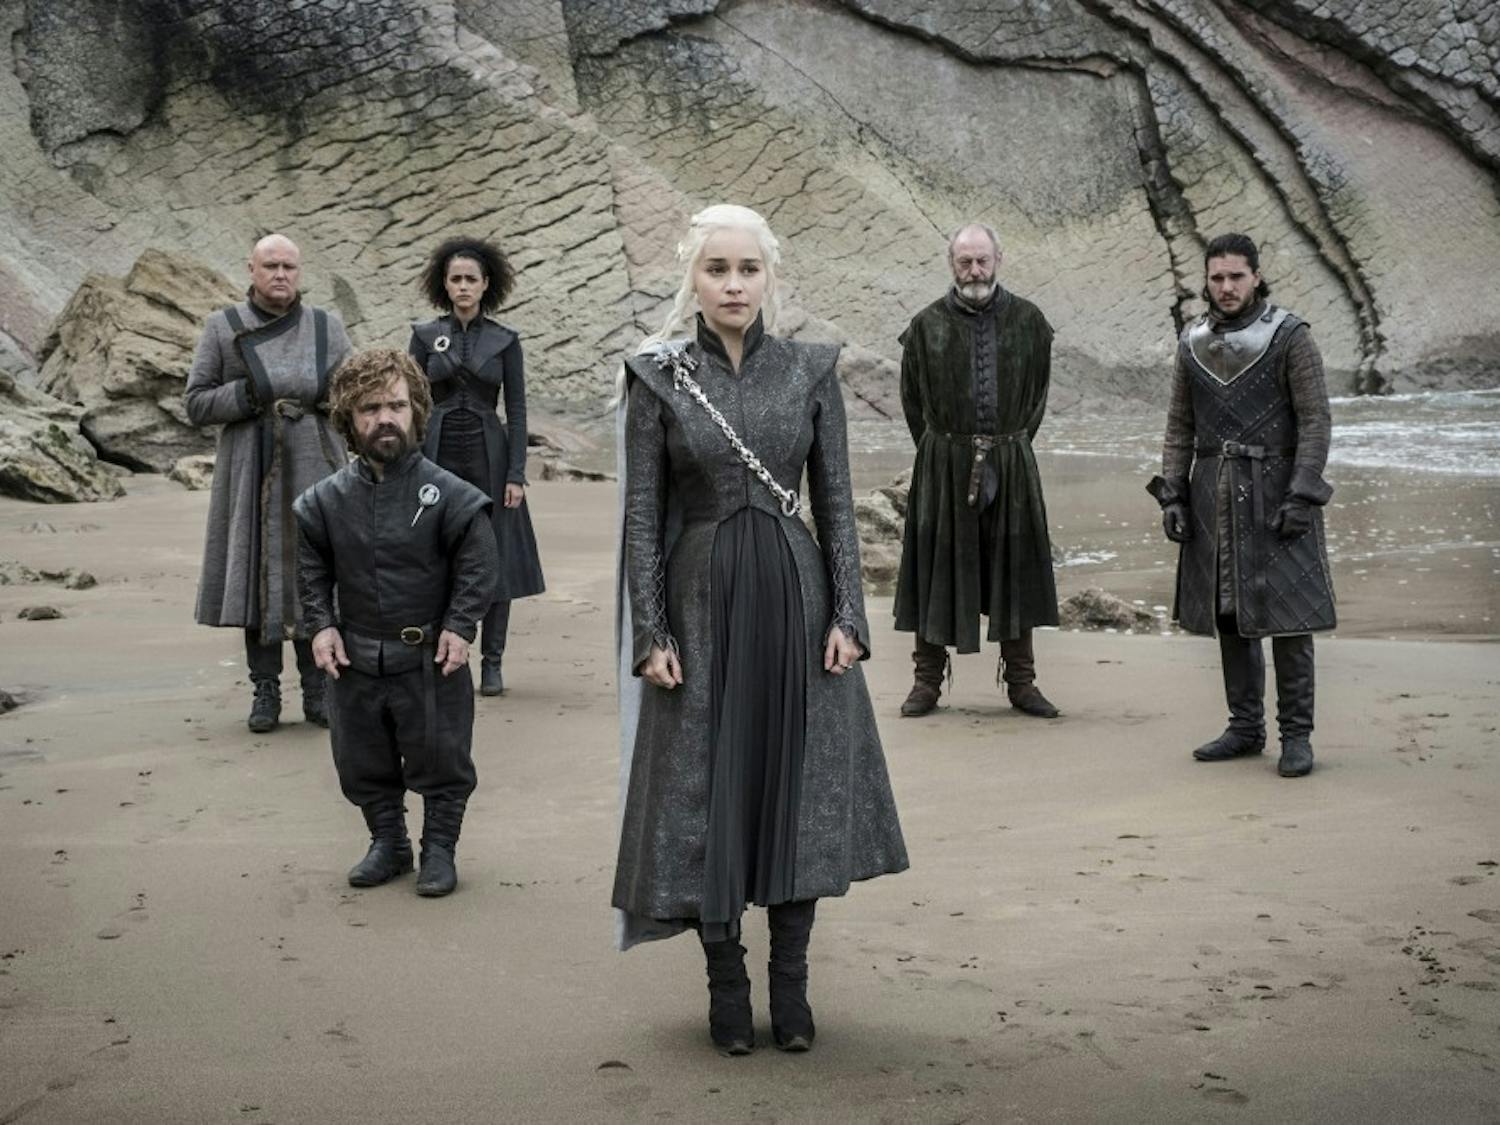 Dragon, roar! 5 thoughts on Episode 4 of Game of Thrones